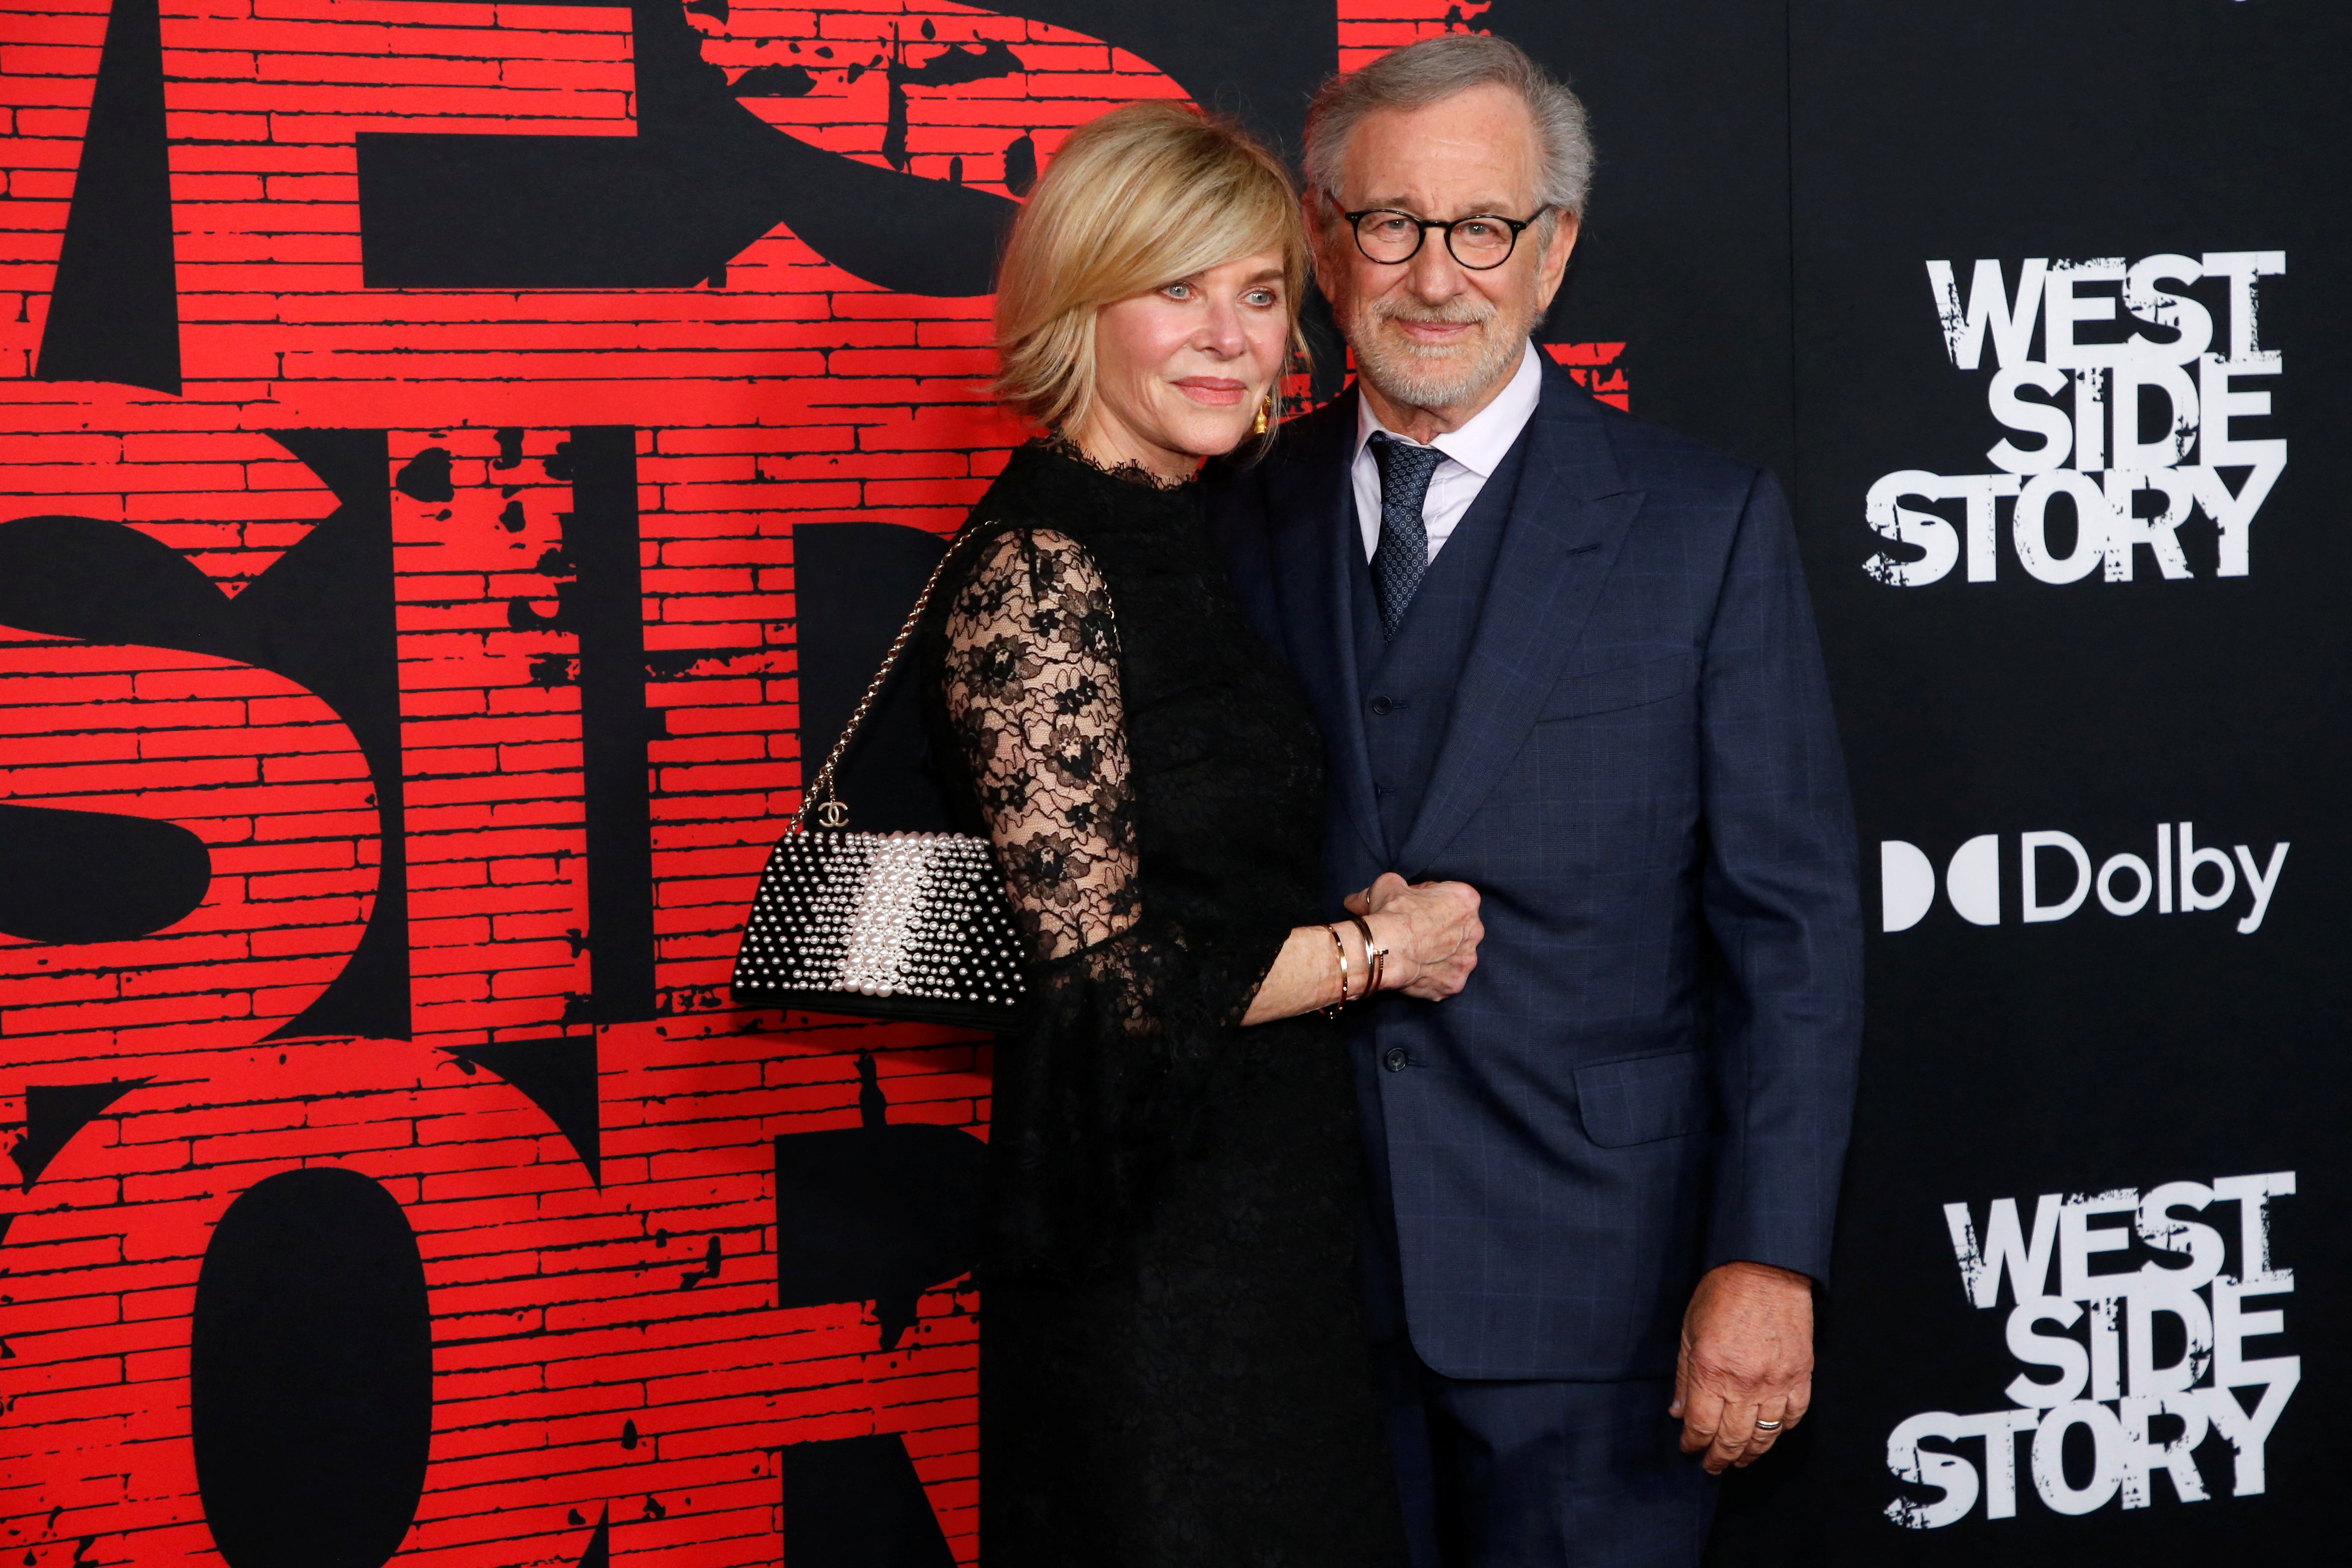 Kate Capshaw and Steven Spielberg attend the premiere for the film West Side Story at El Capitan theatre in Los Angeles, California, U.S. December 7, 2021. REUTERS/Mario Anzuoni/File Photo